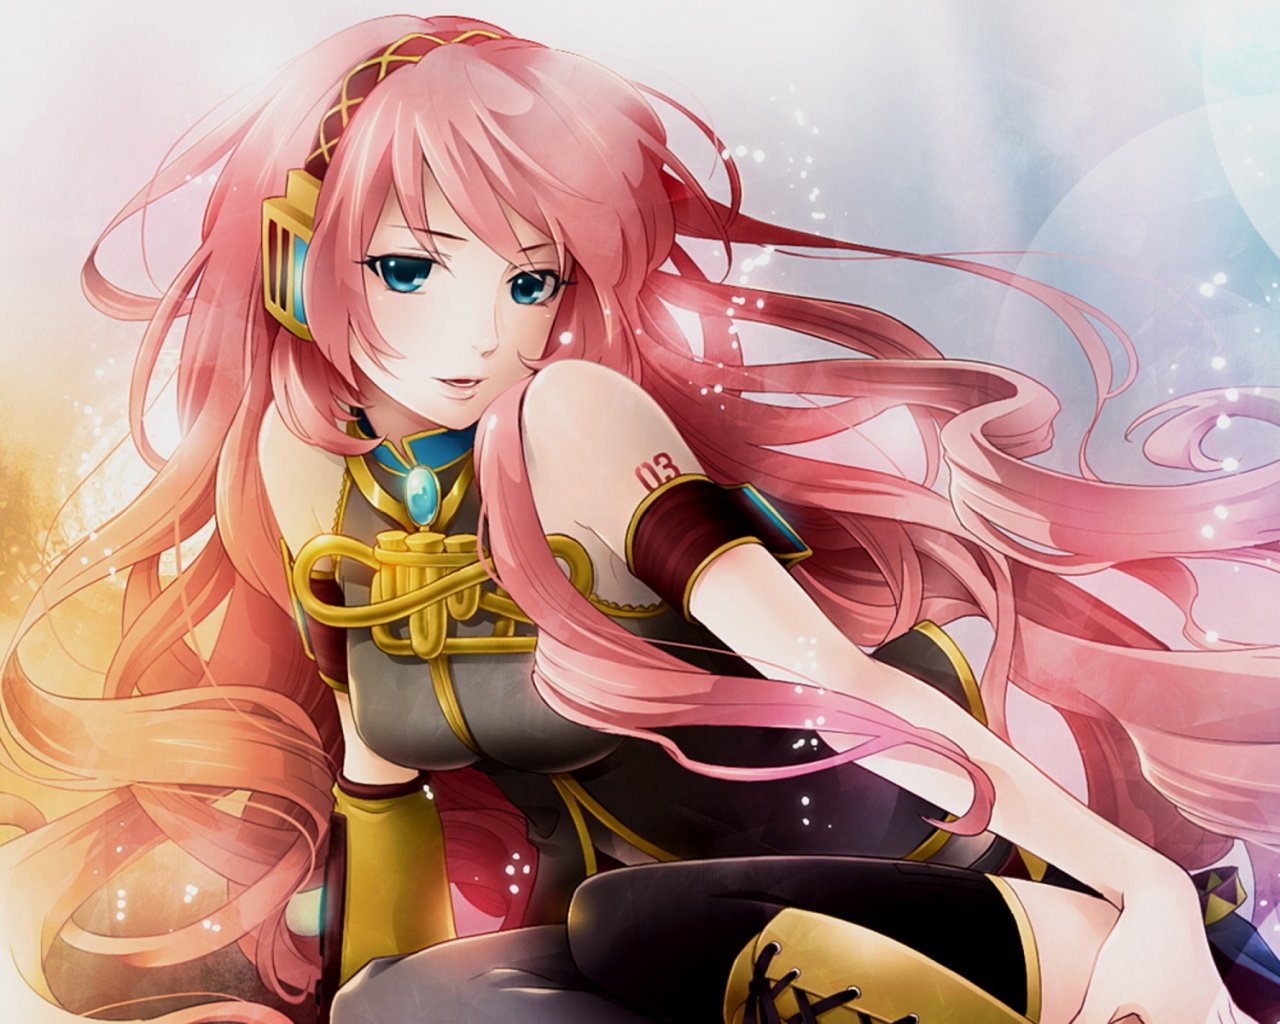 Description: The Wallpaper above is Megurine Luka Music Wallpaper in Resolution 1280x1024. Choose your Resolution and Download Megurine Luka Music Wallpaper